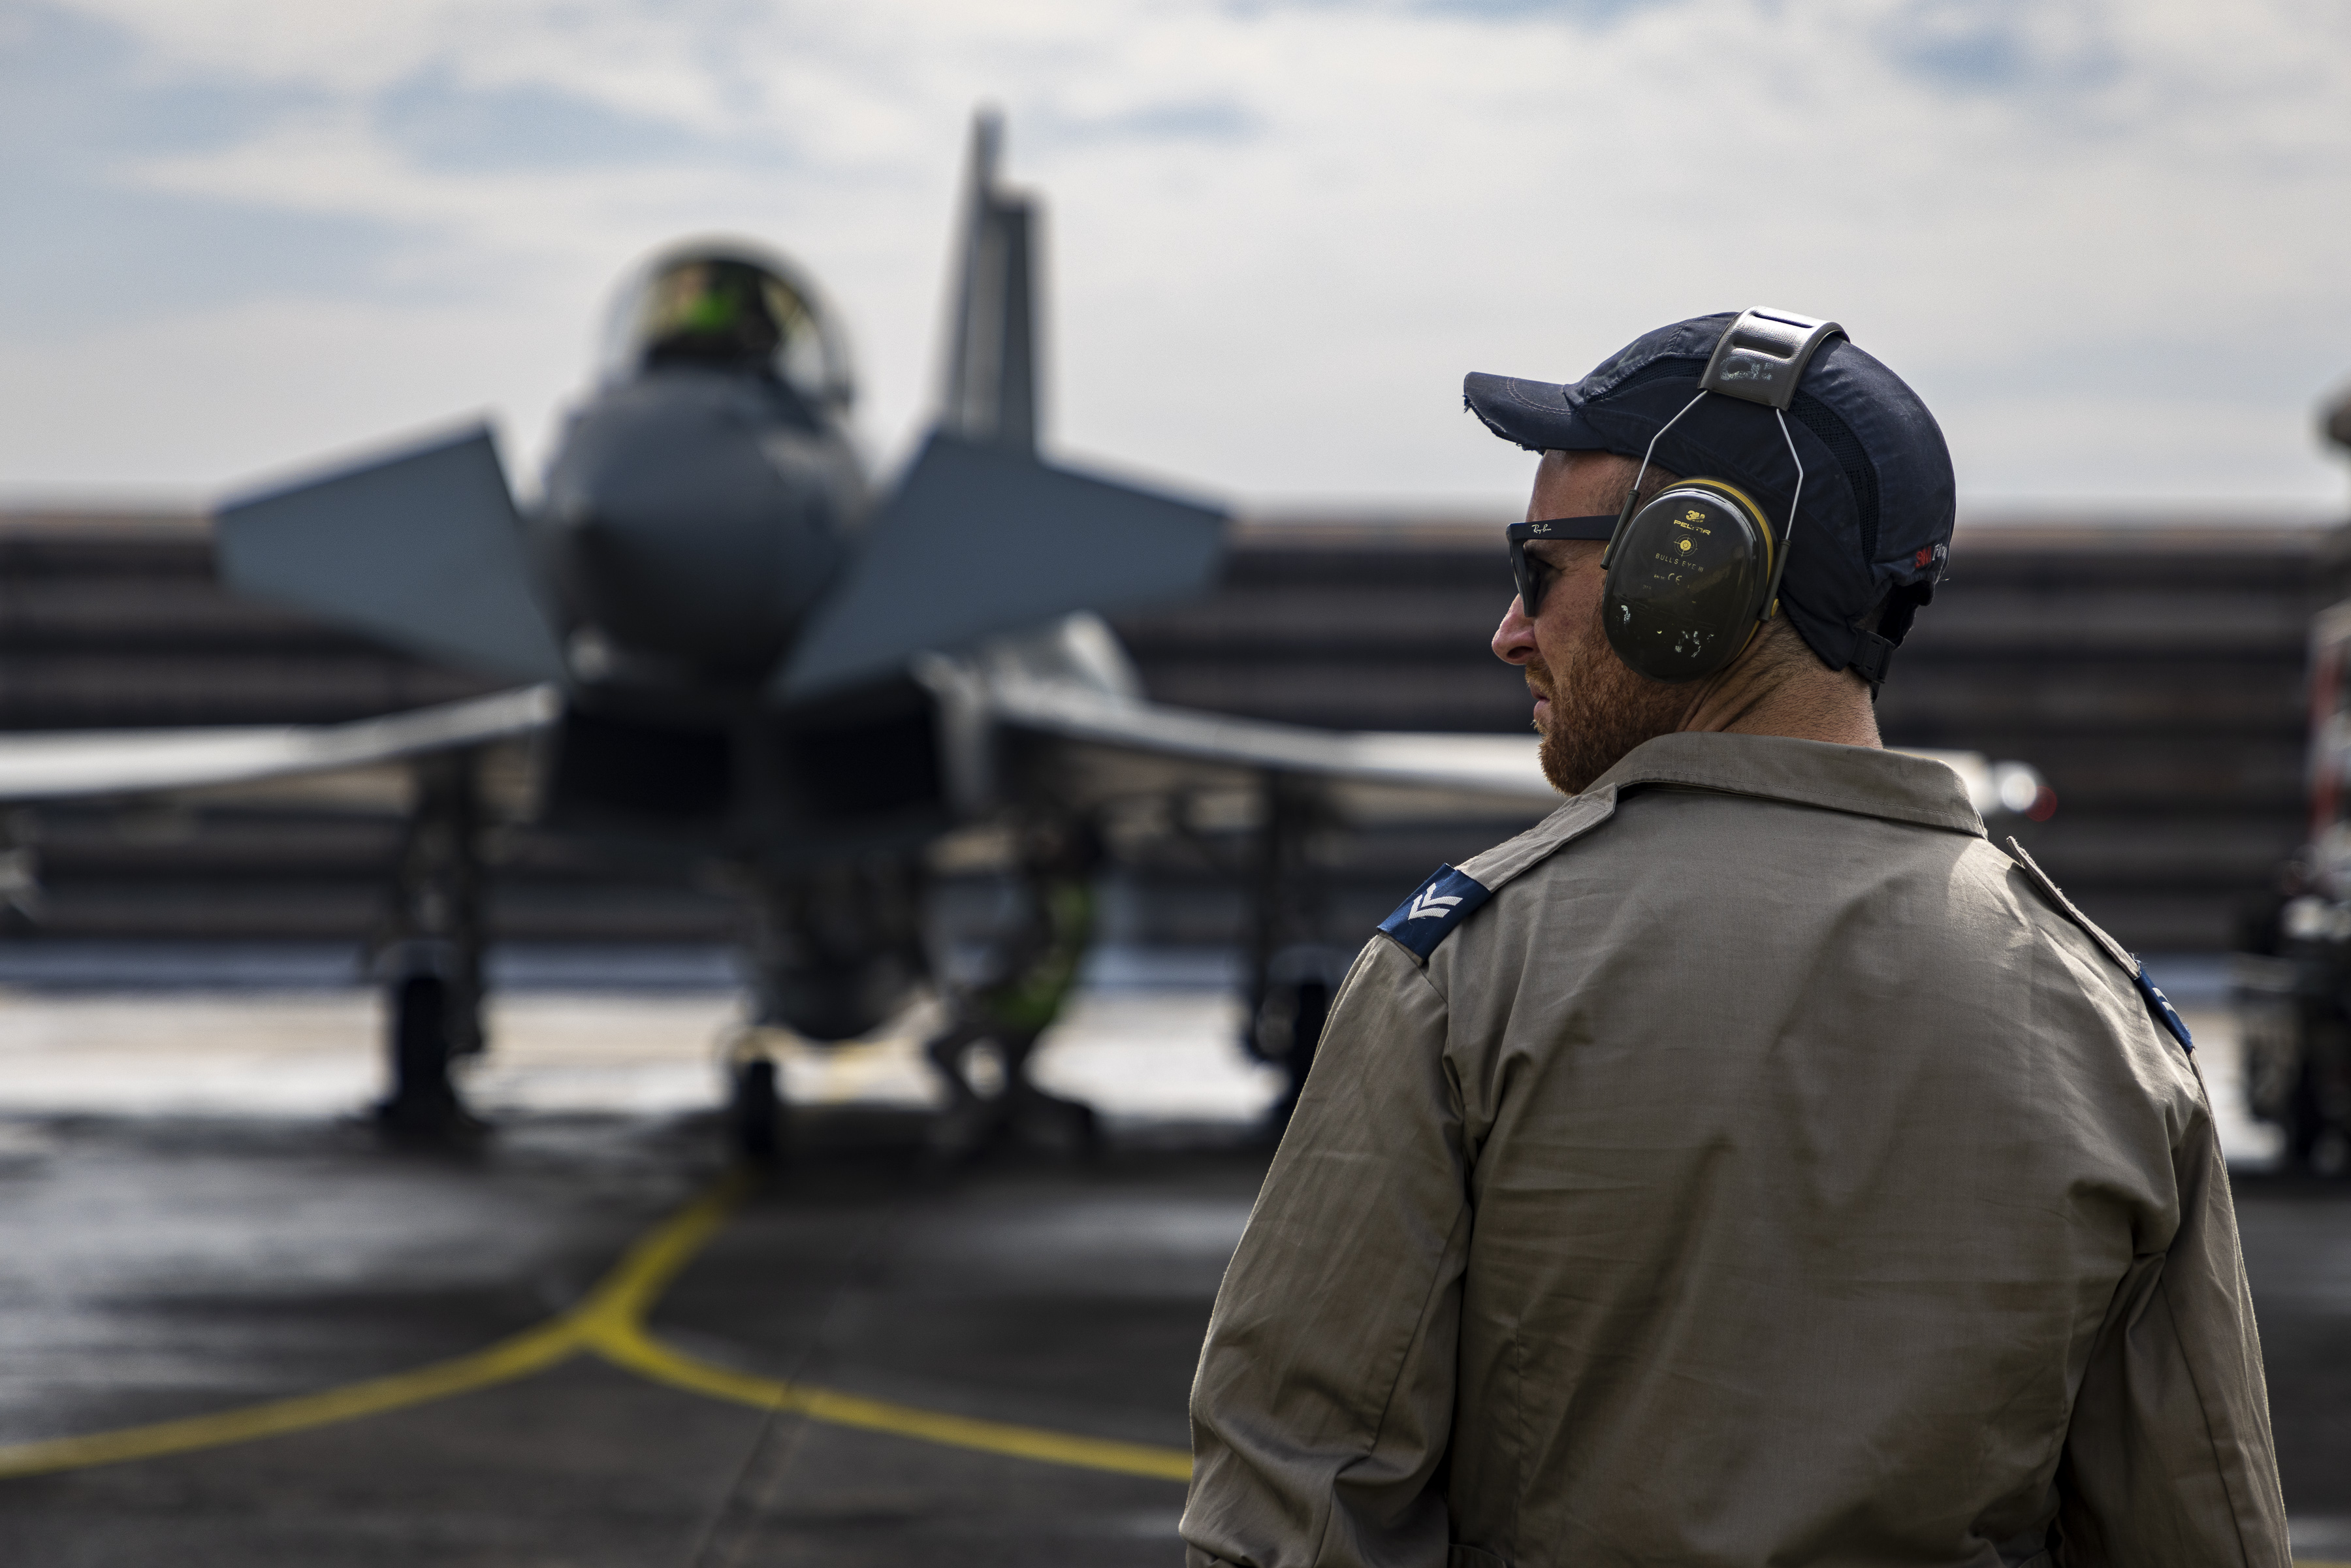 RAF engineer stood on runway with ear protection, directing a taxiing typhoon aircraft